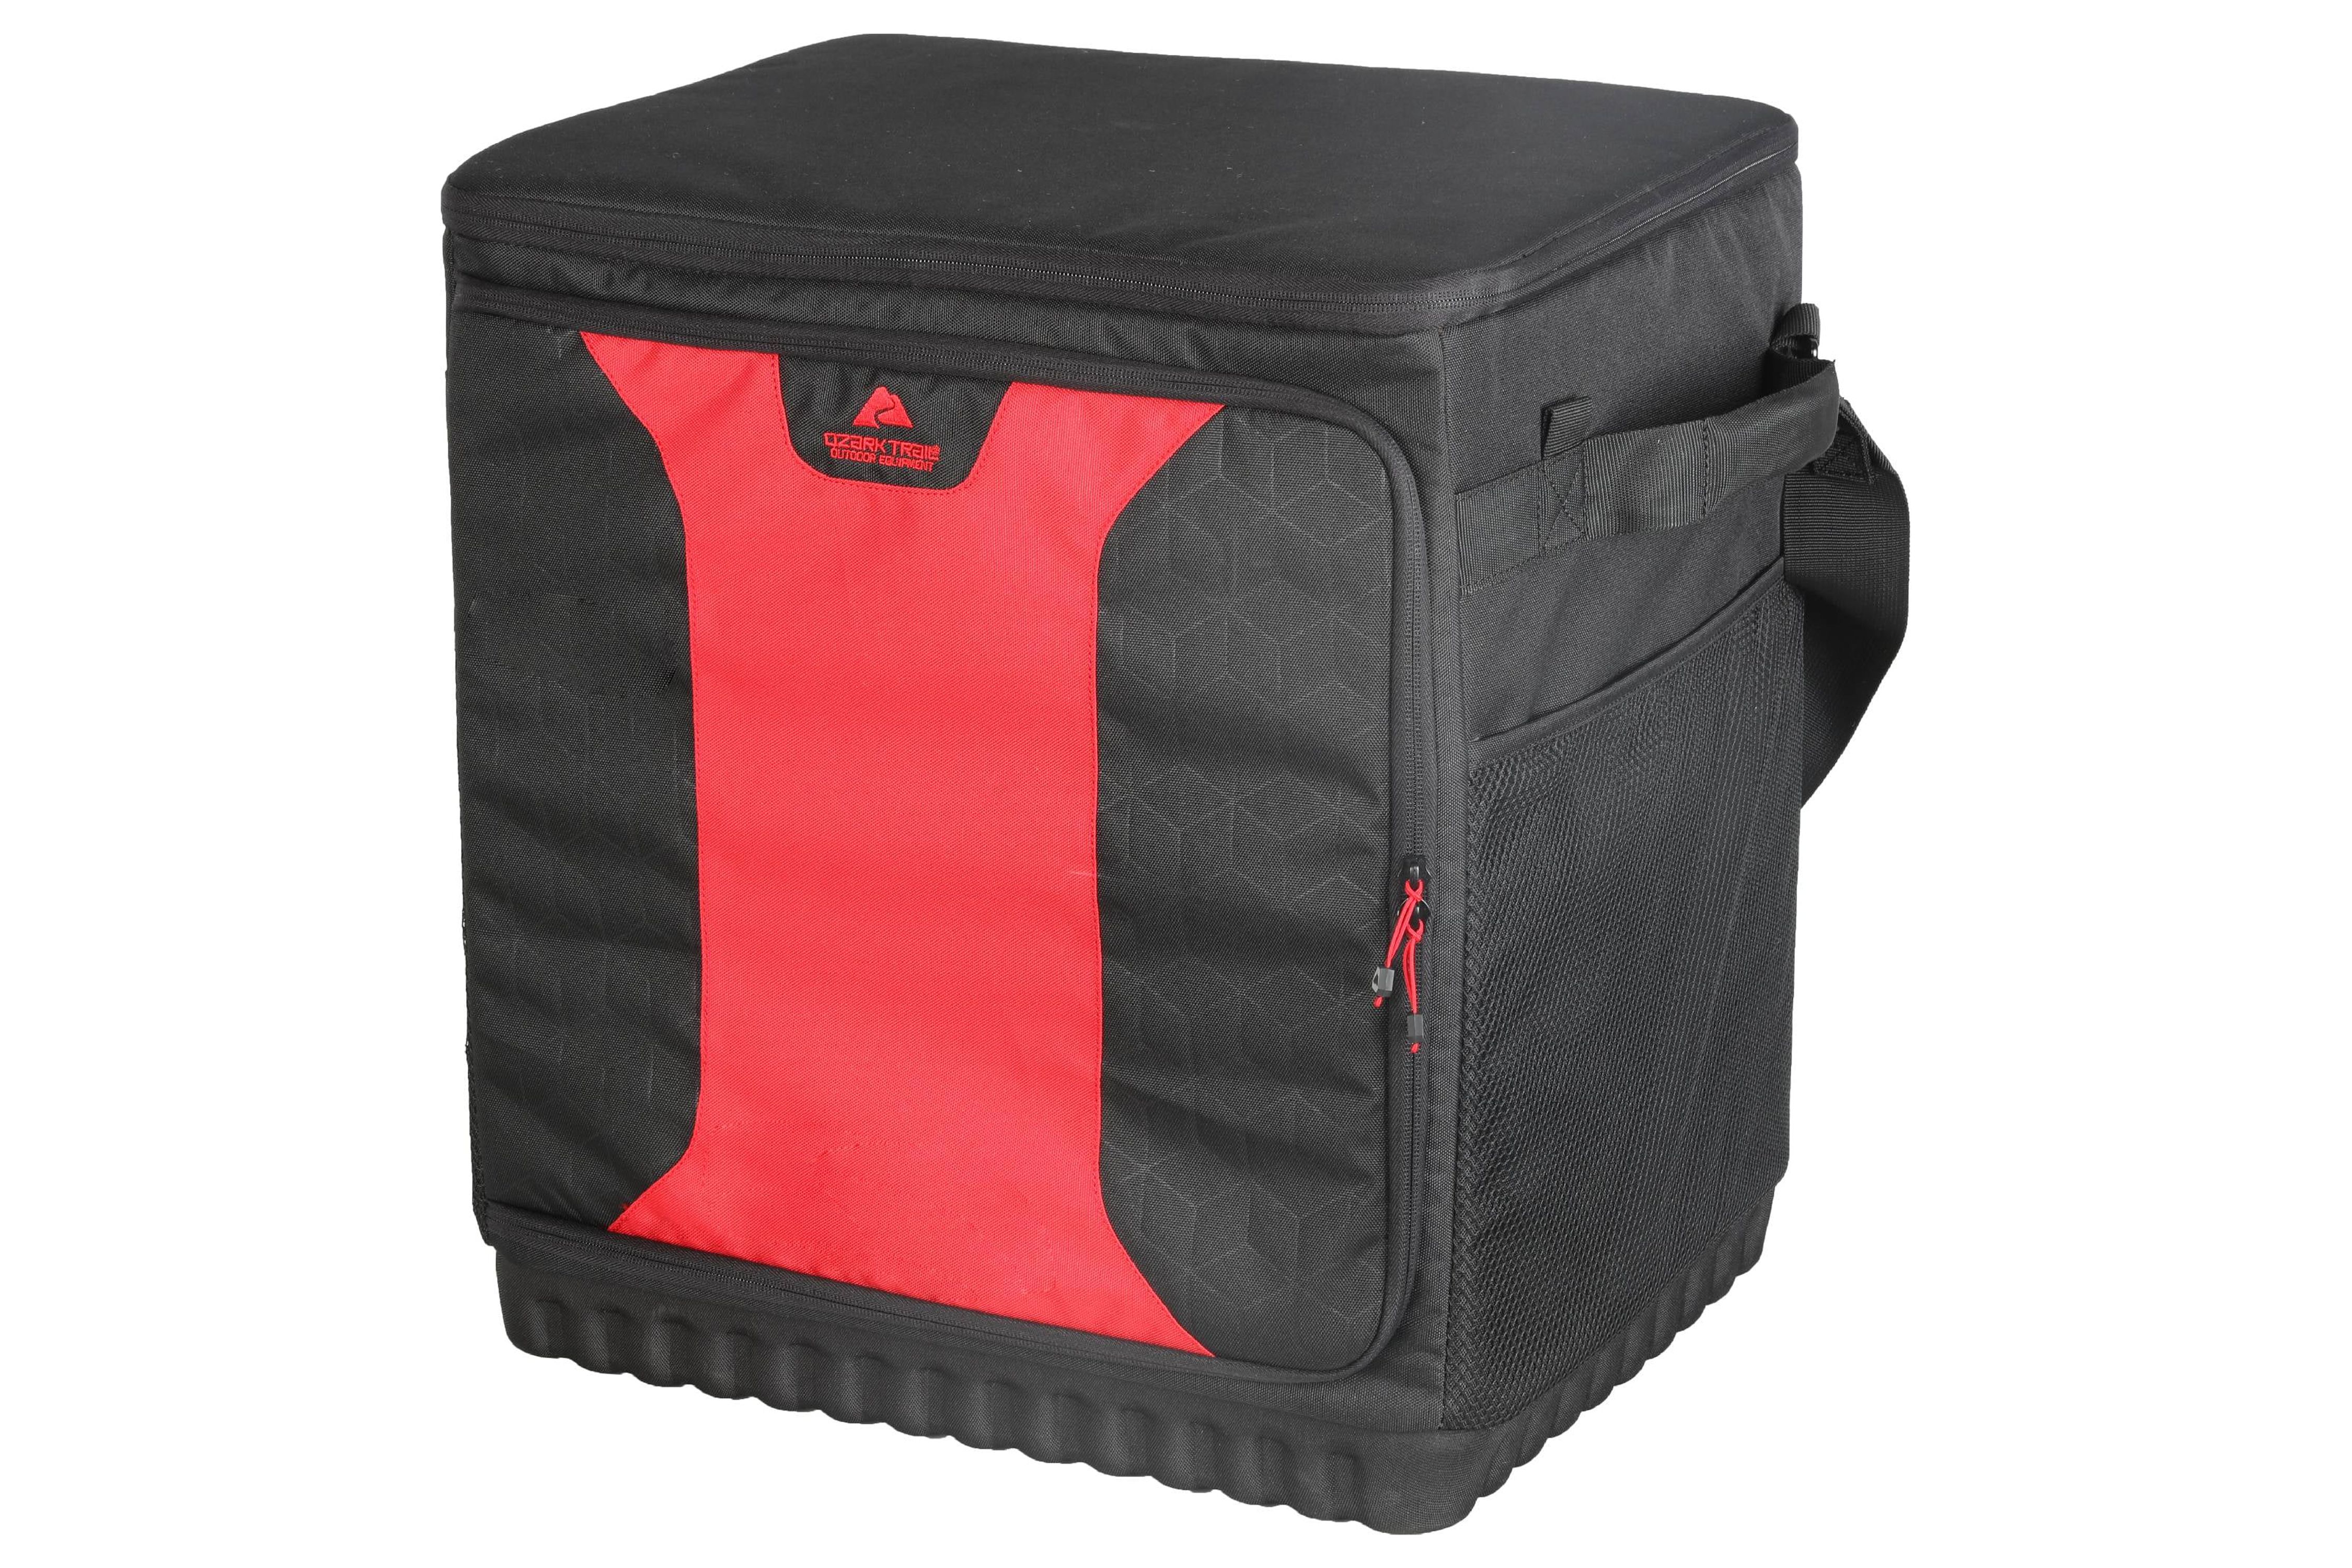 Ozark Trail Crane Lake Deluxe Outdoor Camp Storage Organizer, Black and Red - image 2 of 9